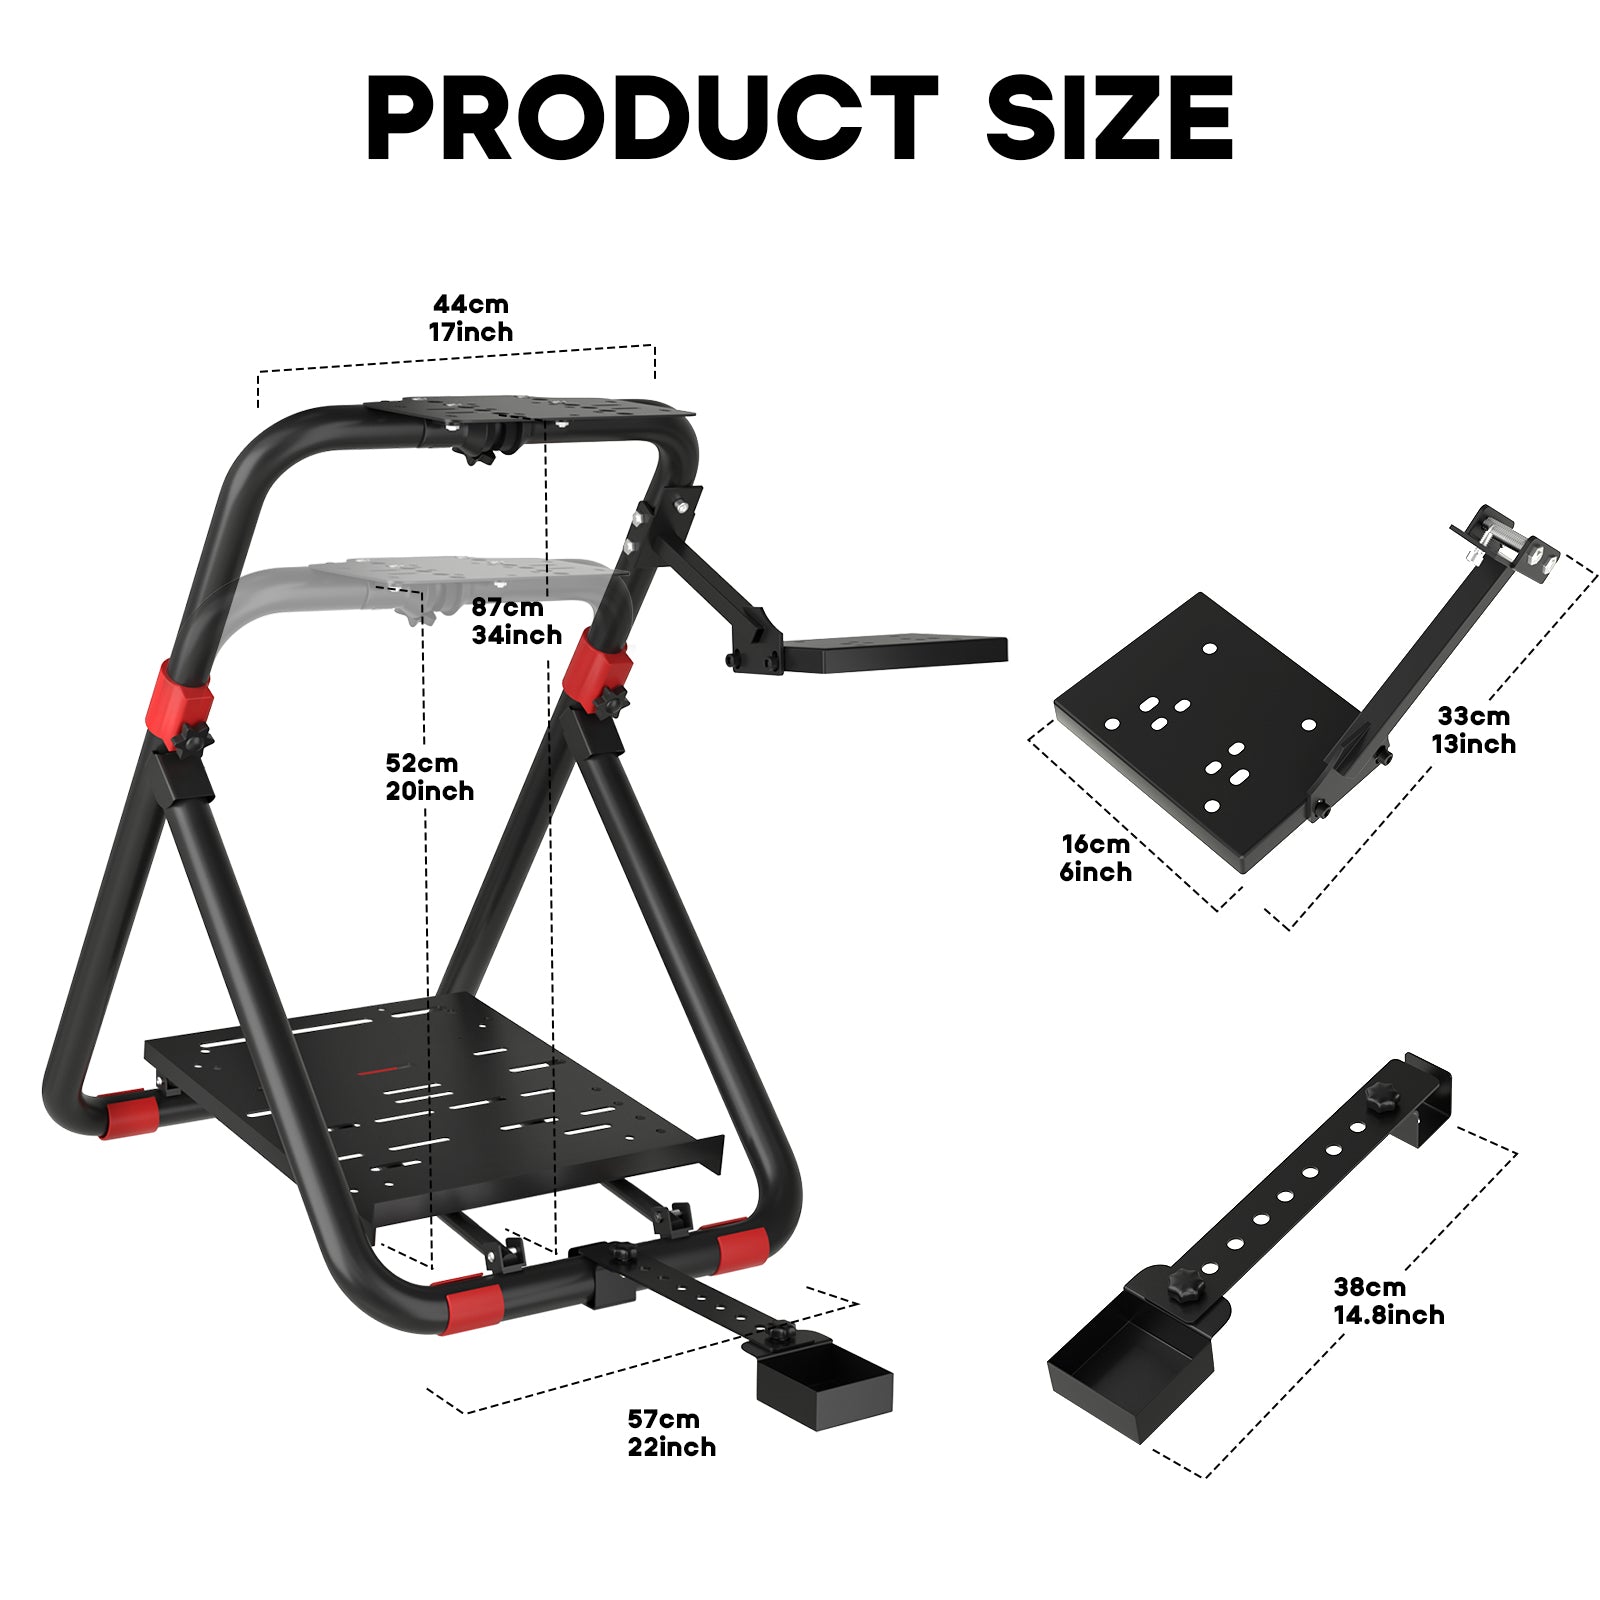 D004X racing wheel stand size